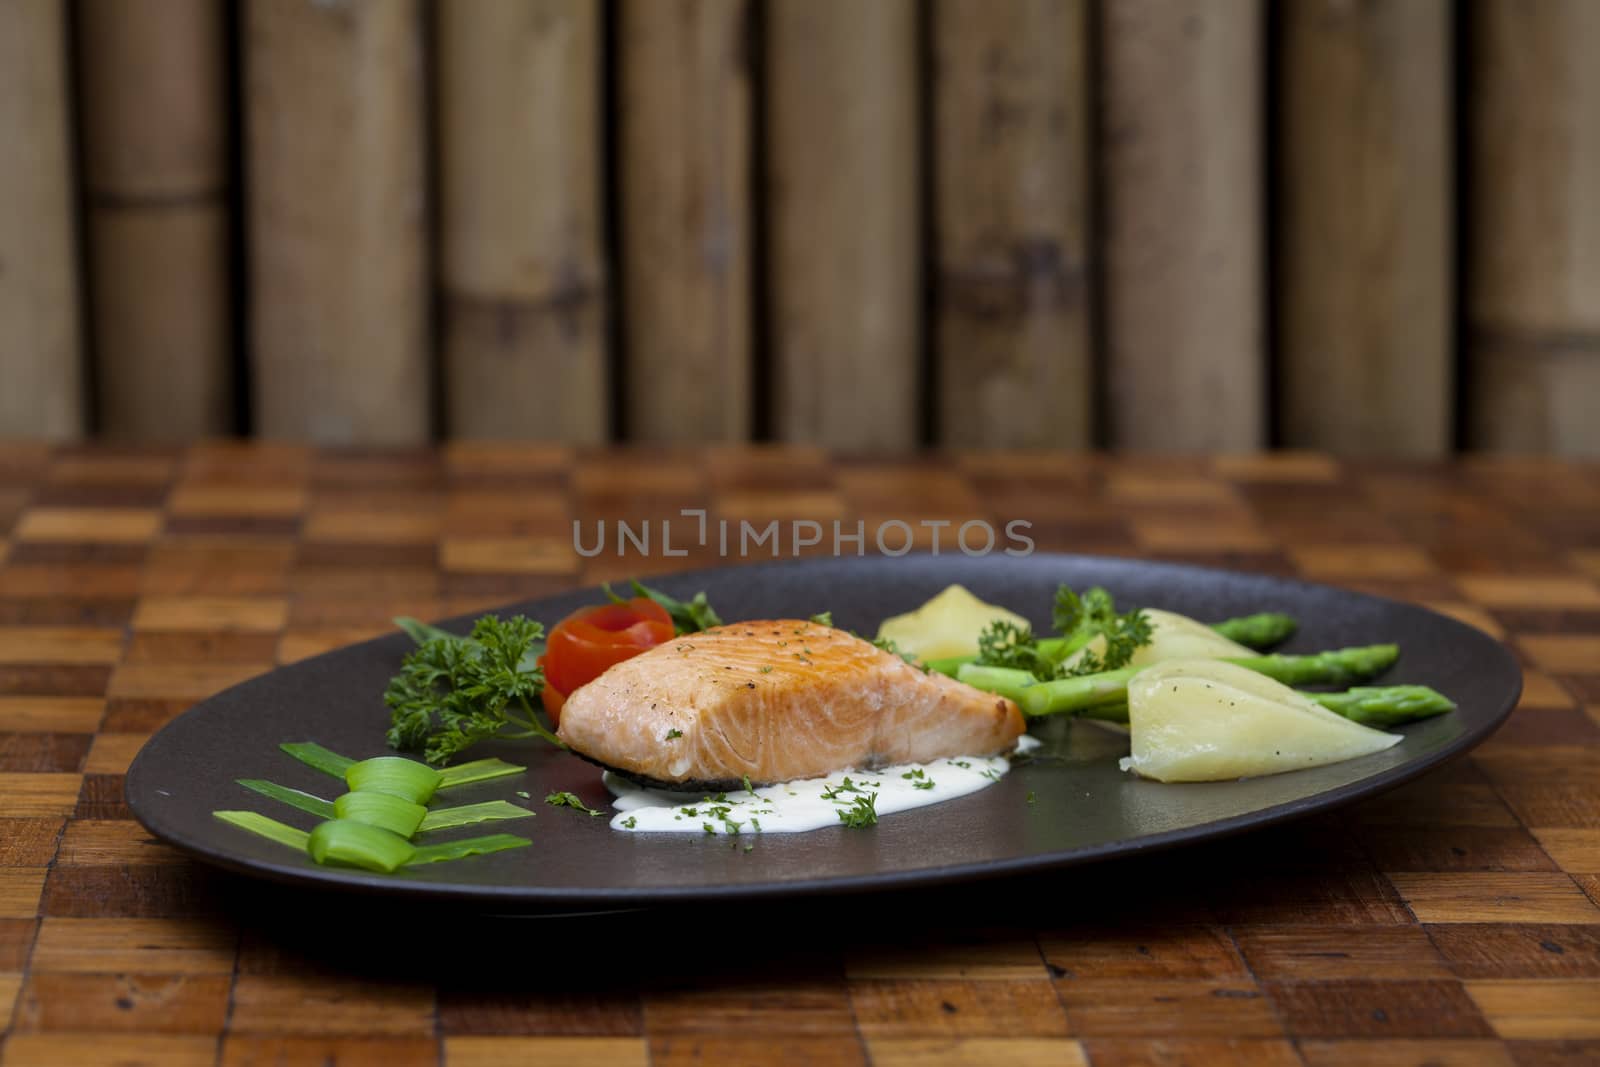 Atlantic salmon with a rocket salad,Decorated with vegetables on a black plate.